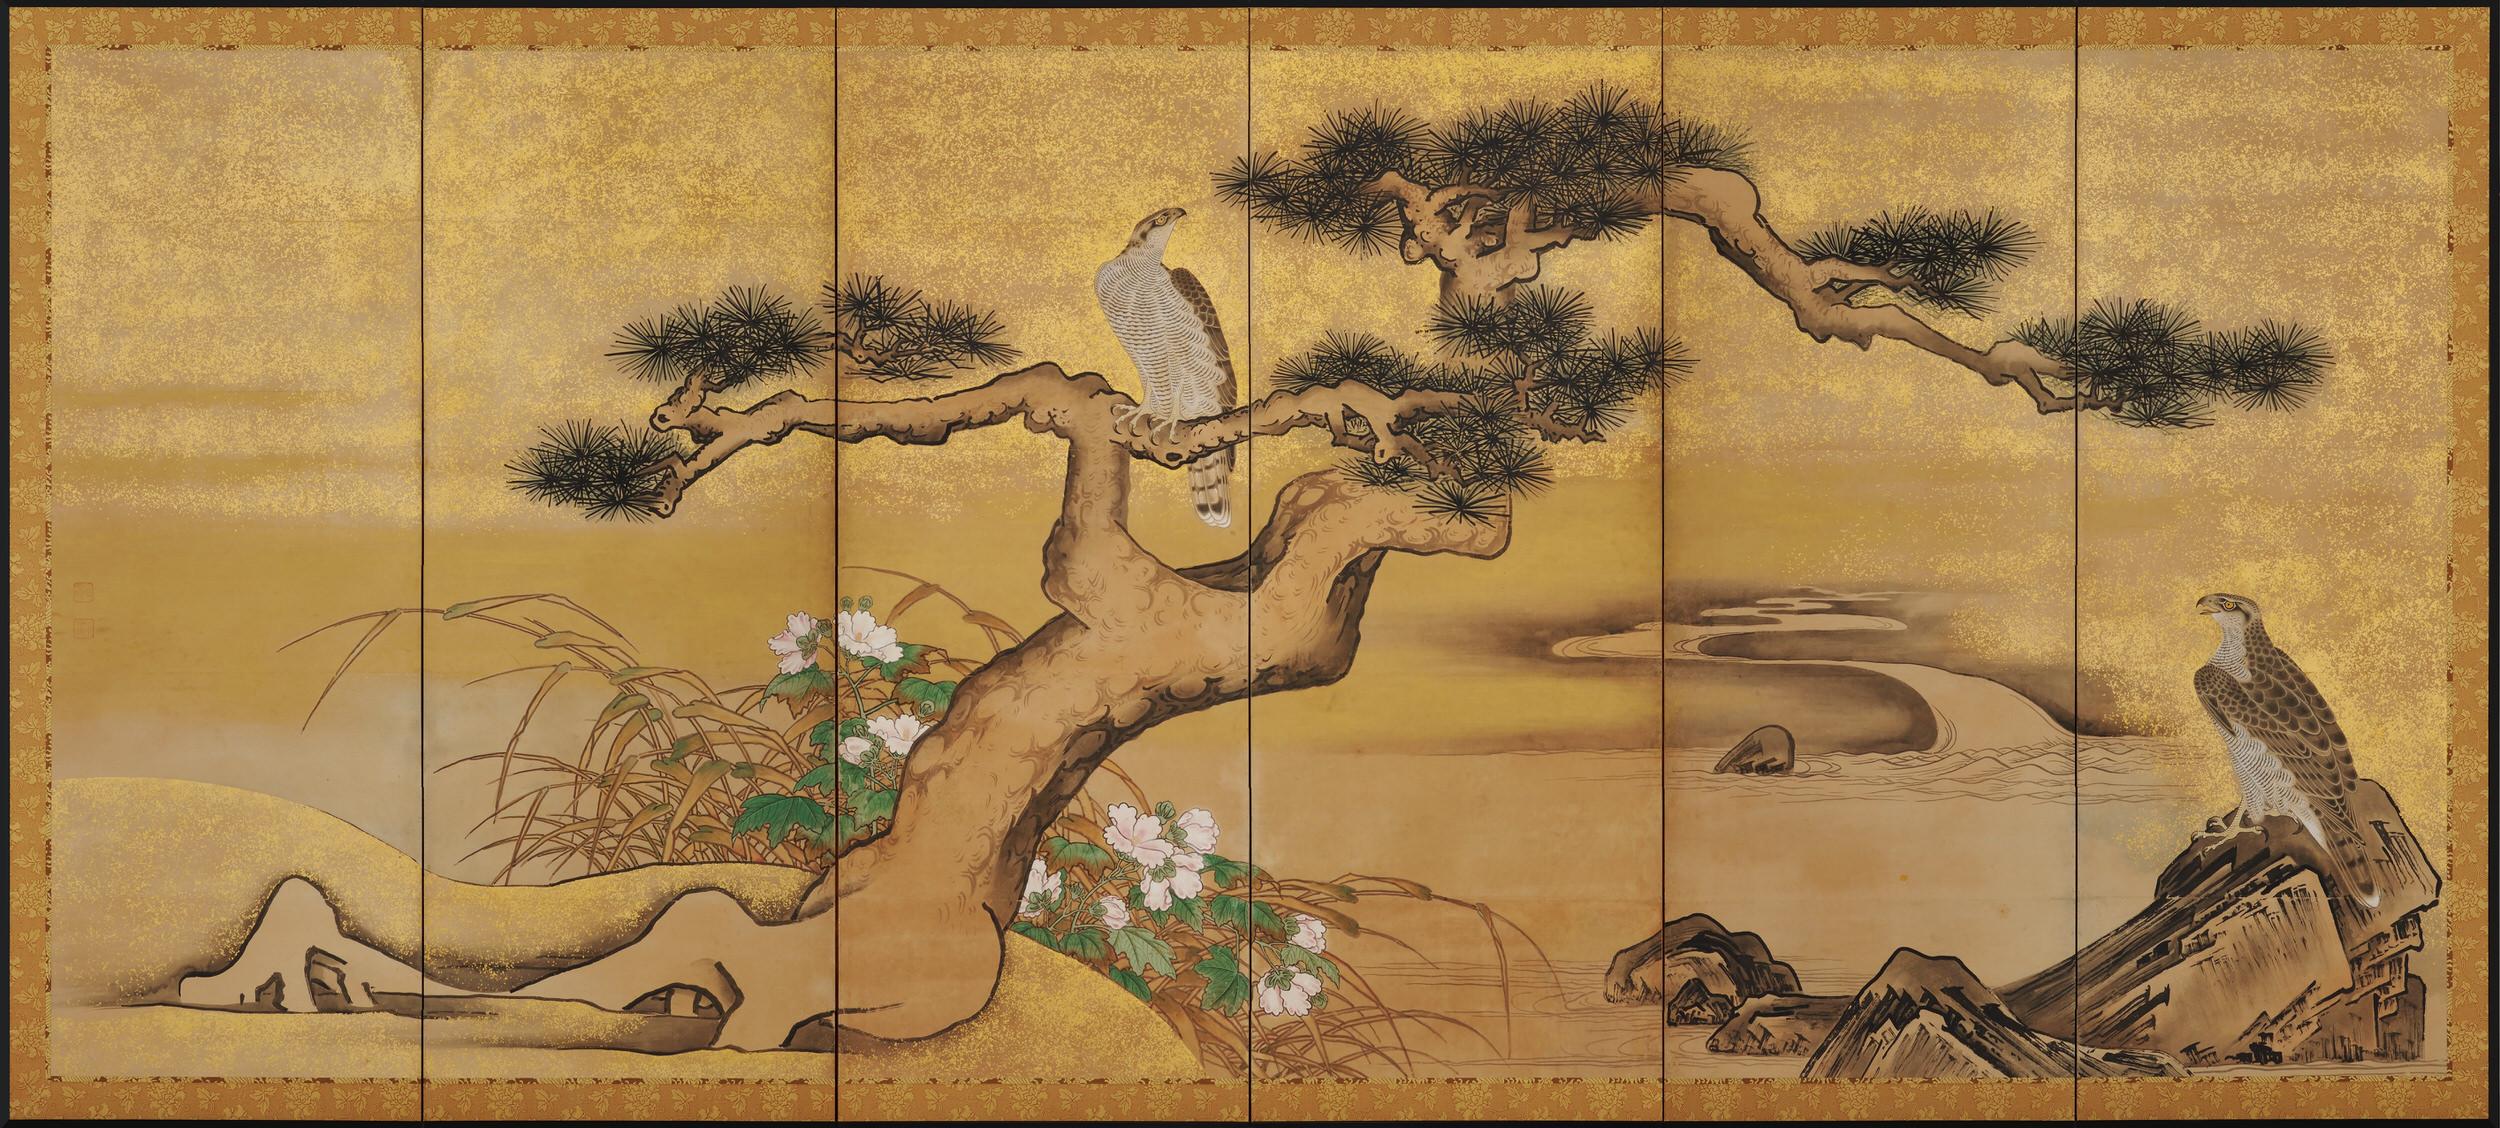 Hawks on plum and pine

Soga Nichokuan (active circa 1625-1660)

Pair of six-fold screens.

Ink, mineral pigments, gofun, gold and speckled gold leaf on paper.

Upper seal: Hoin
Lower seal: Nichokuan

The combination of pine trees and